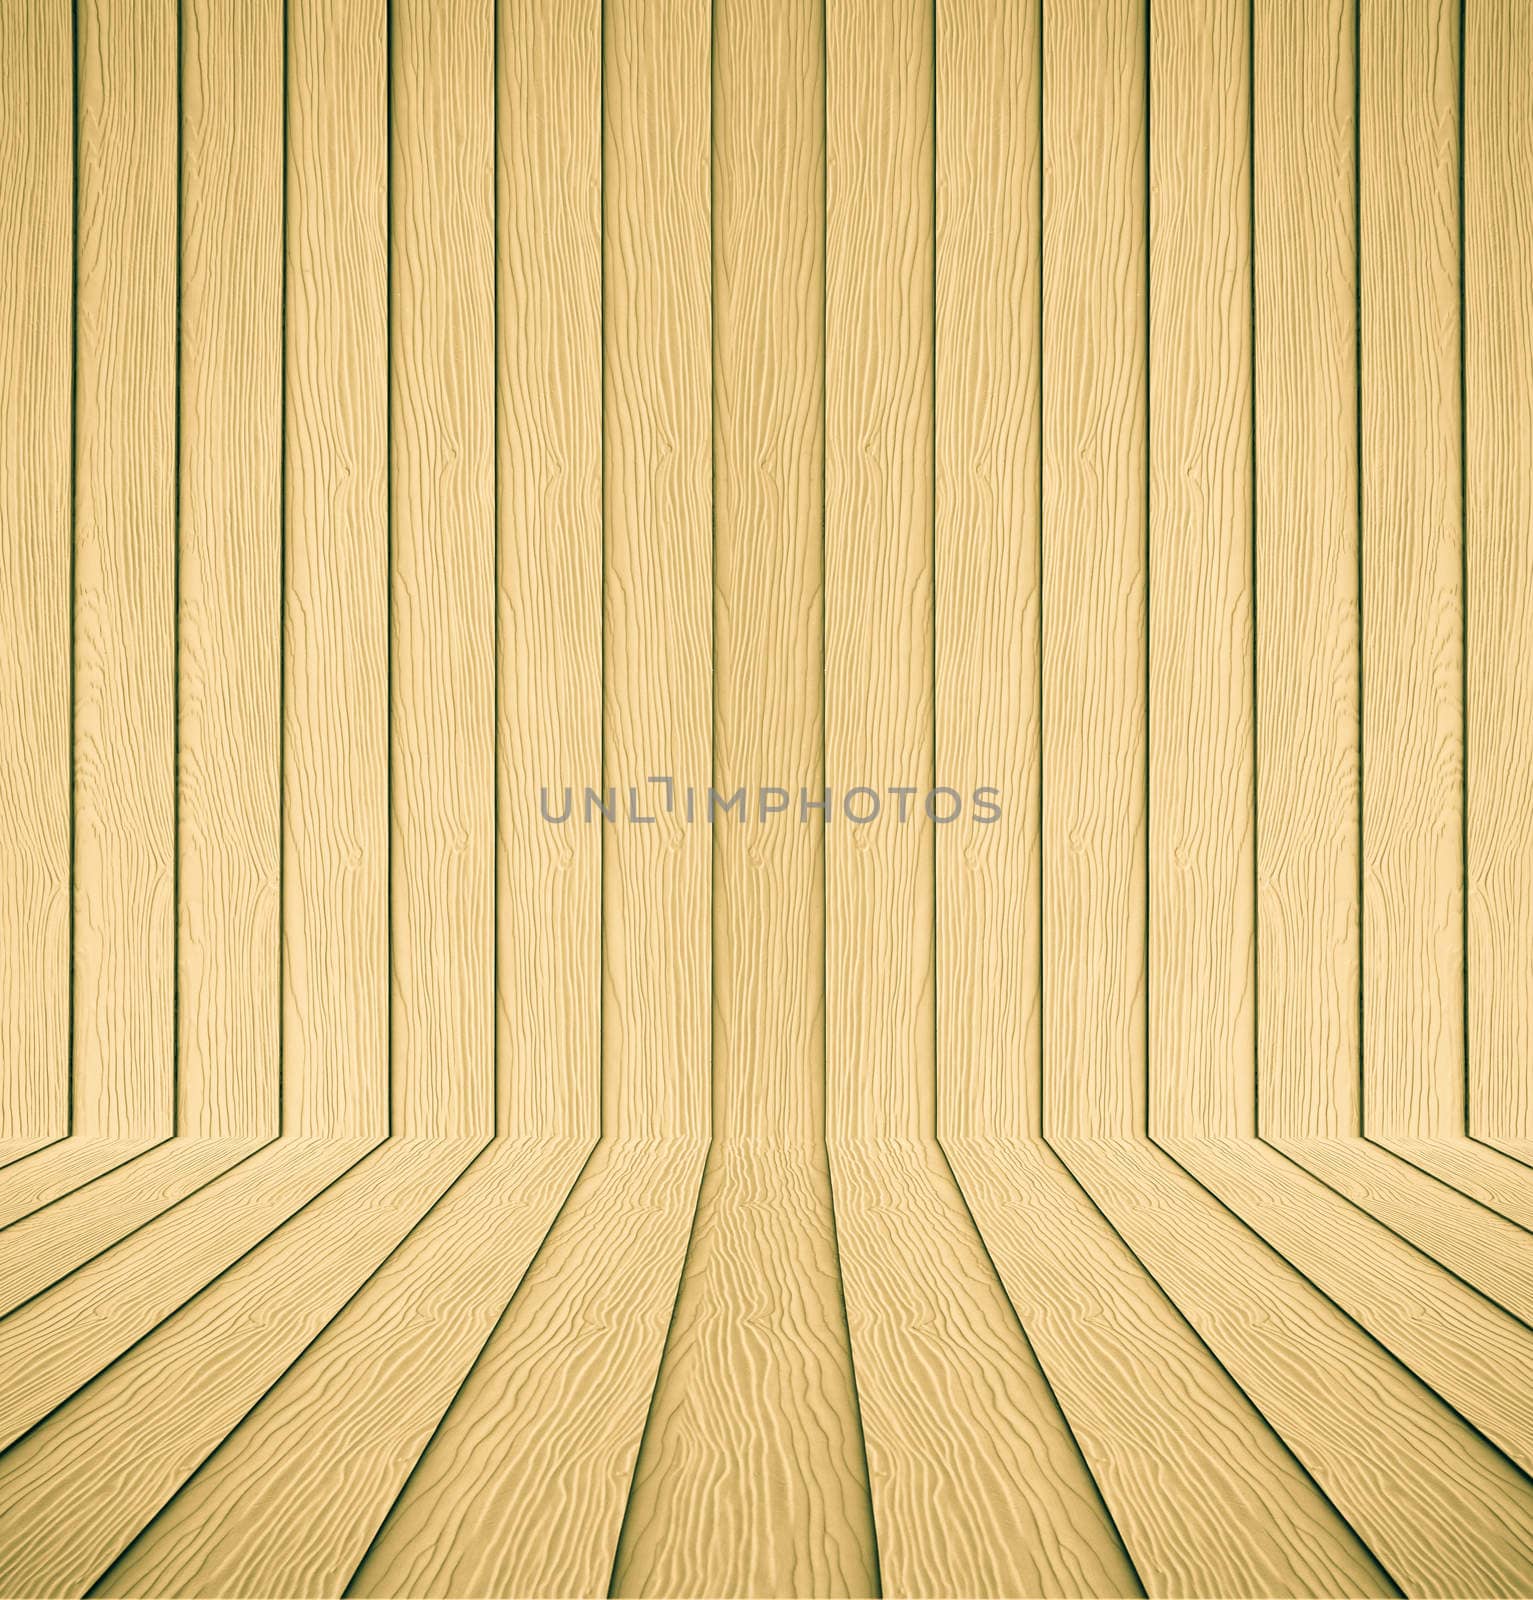 Yellow Wood texture background